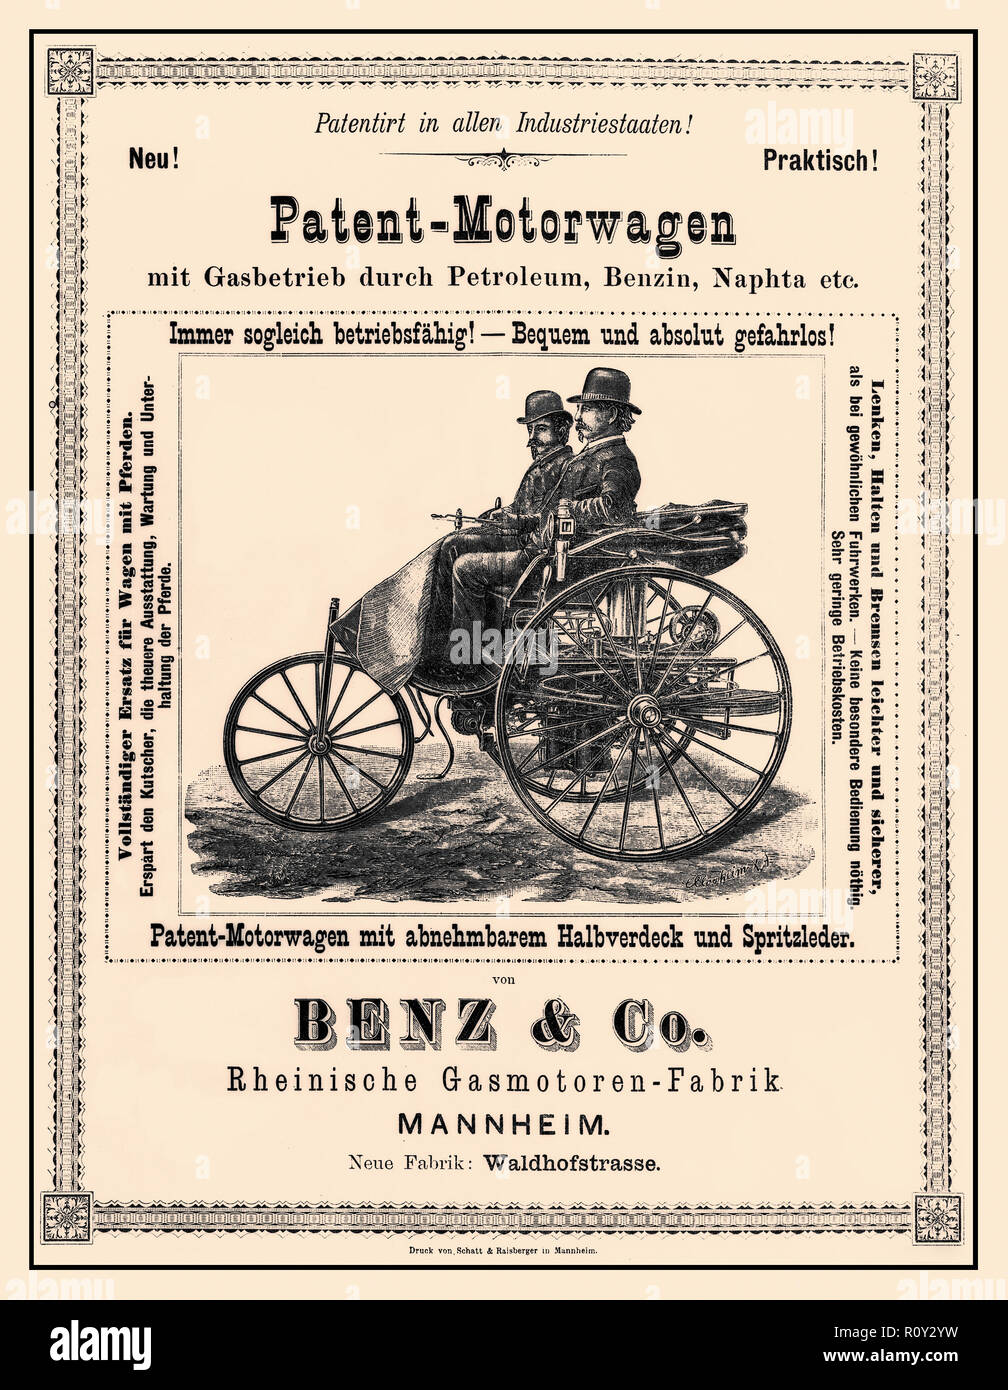 https://c8.alamy.com/comp/R0Y2YW/benz-motorwagen-vintage-historic-advertisement-1886-for-the-patent-motorwagen-carl-benz-unveiled-his-patent-motorwagen-the-worlds-first-motor-car-in-1886-by-1894-a-total-of-25-had-been-built-with-engine-outputs-varying-between-15-and-3-horsepower-11-22-kw-the-original-patent-motorwagen-was-the-type-i-it-had-steel-spoked-wheels-as-well-as-further-design-details-that-took-their-cue-from-state-of-the-art-bicycle-manufacture-at-that-time-R0Y2YW.jpg